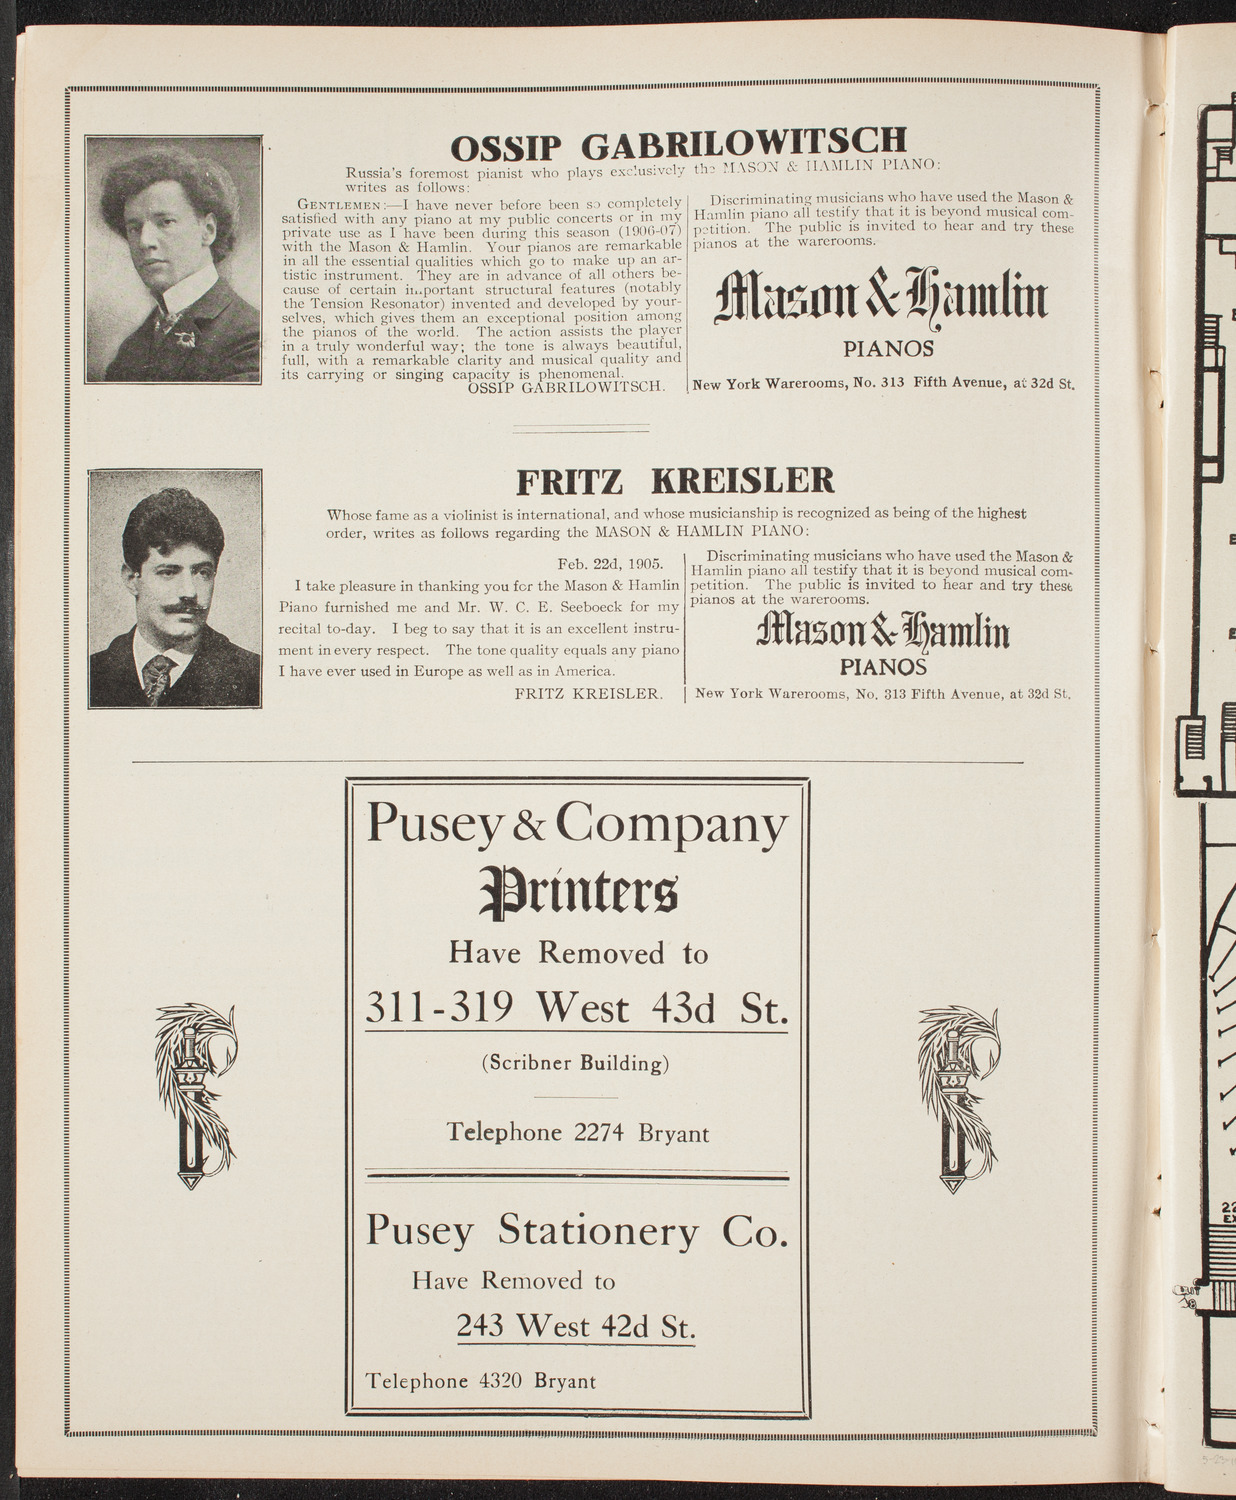 Graduation: Packard Commercial School, May 23, 1910, program page 10